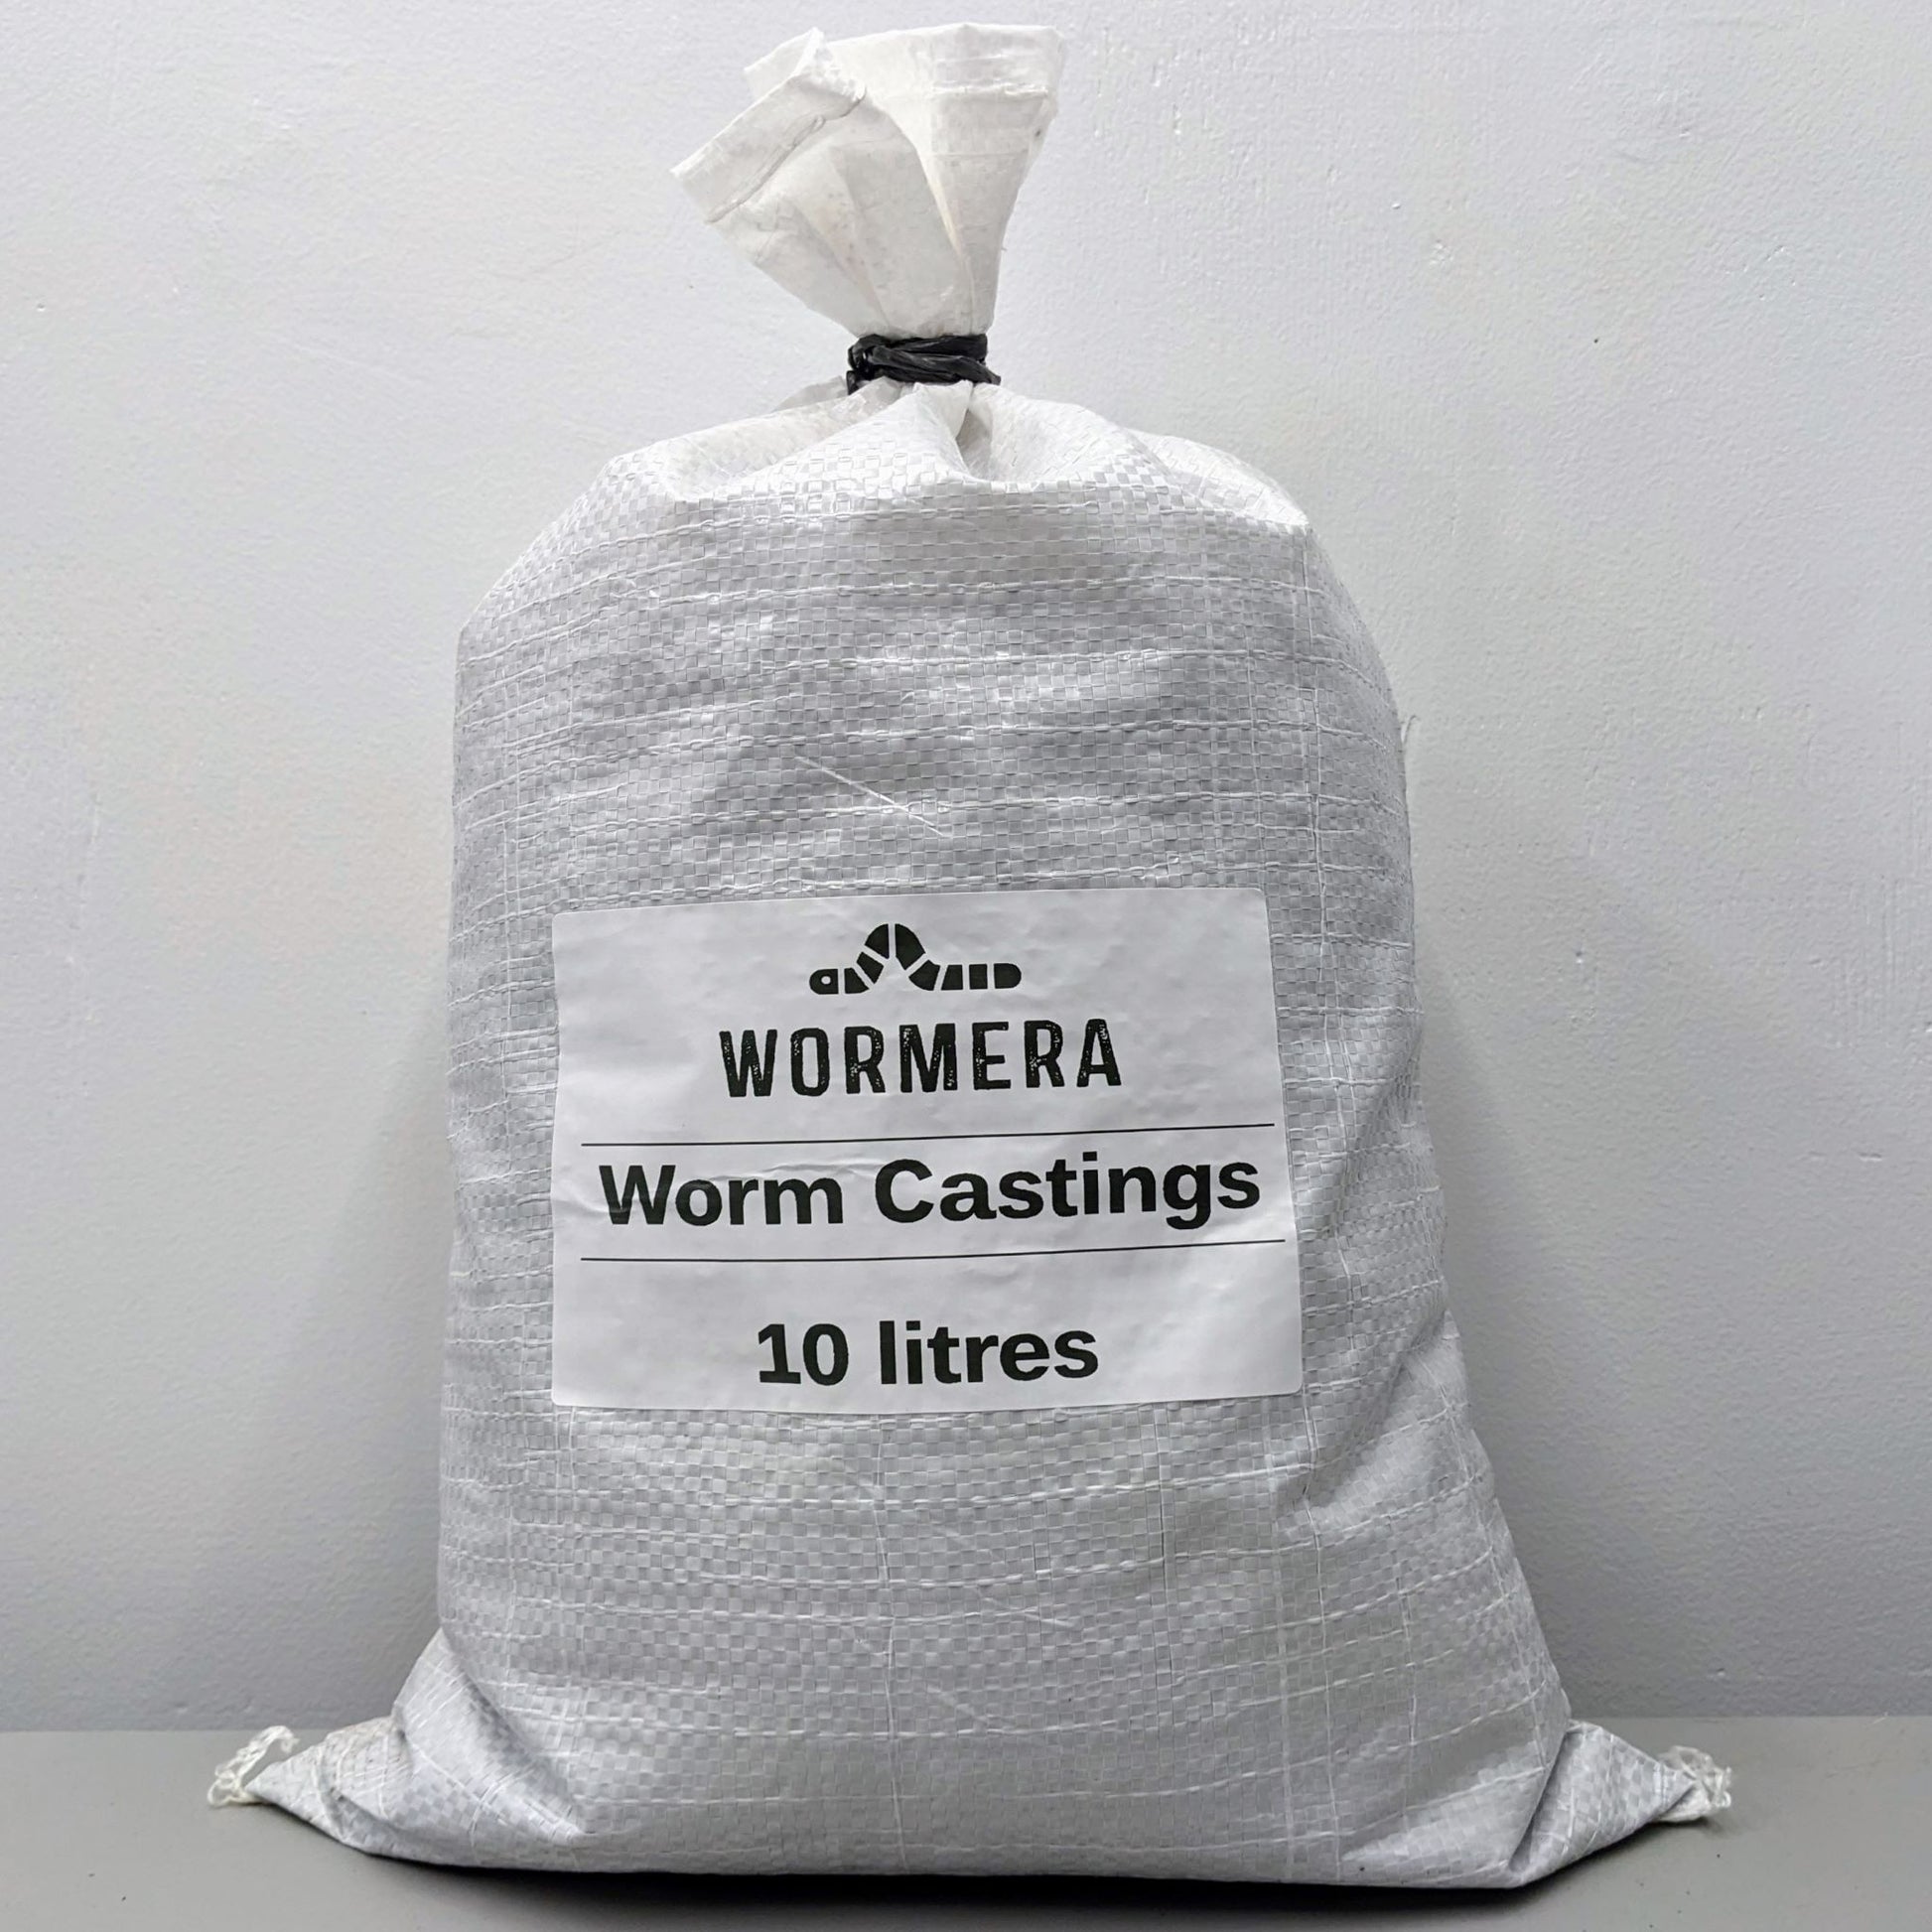 Red wiggler worm castings 10 litre size.